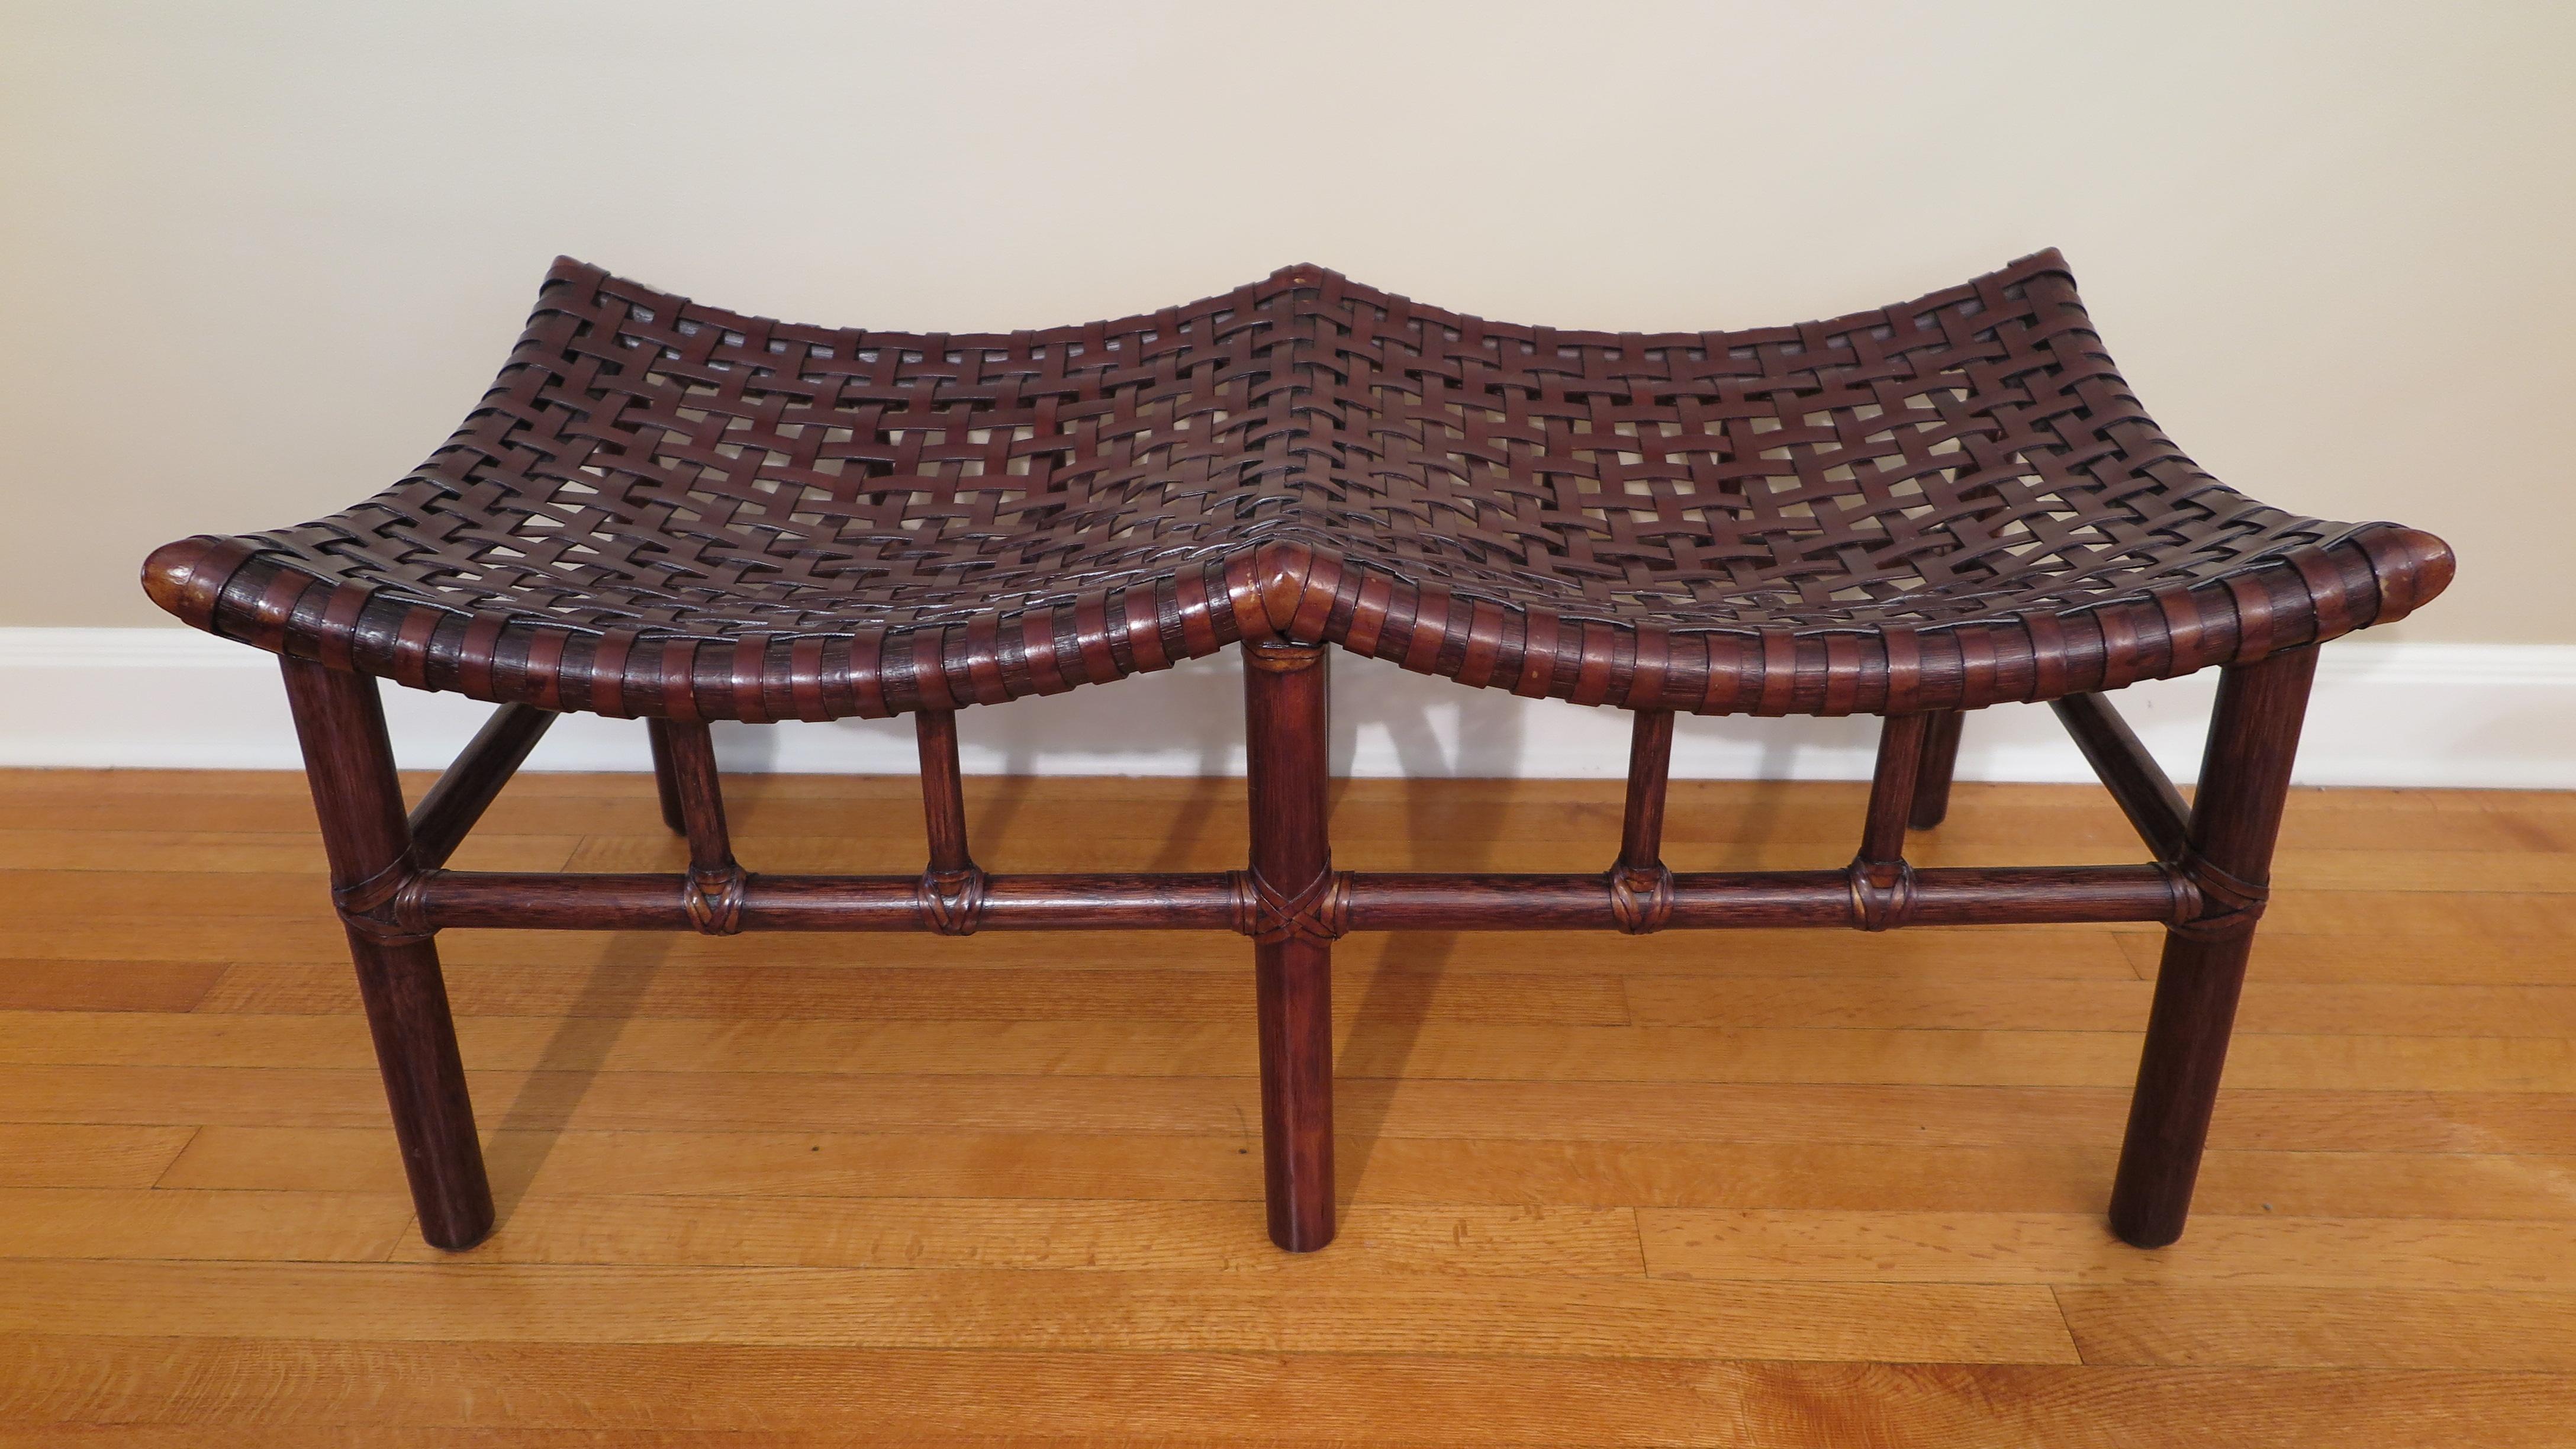 McGuire rattan bench seat. Two-seat bench in very good condition.
Lightly used.